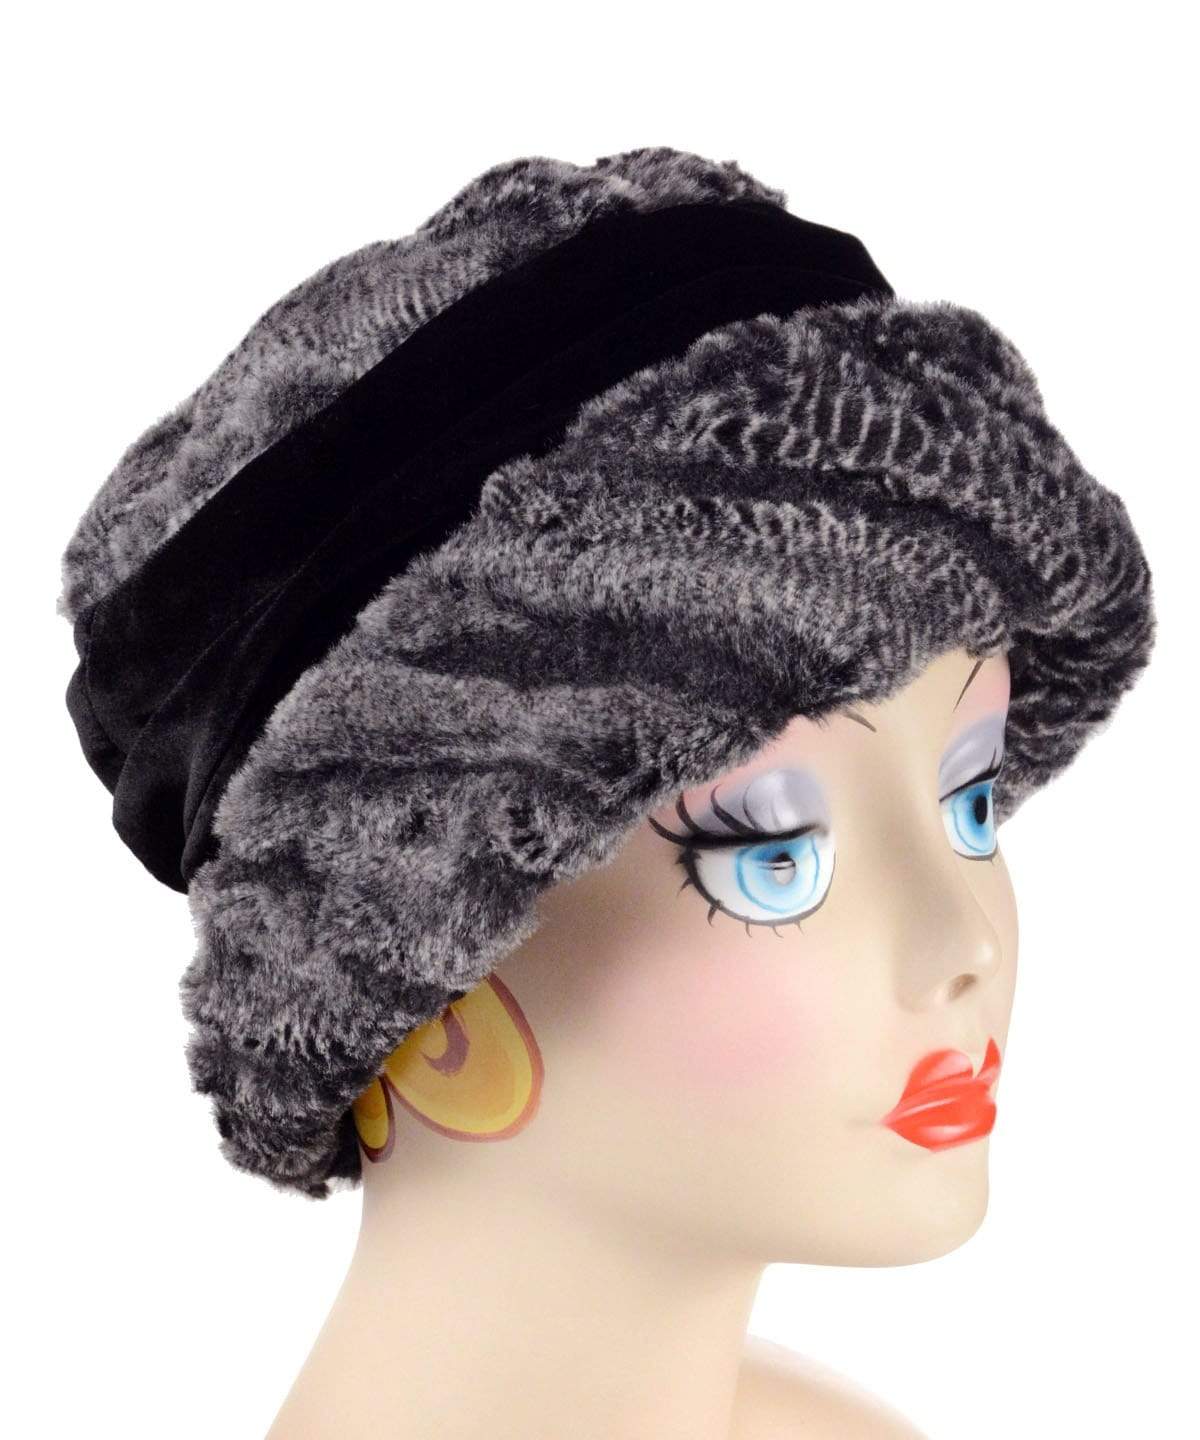 Ana Cloche Style Hat in Rattle N Shake Faux Fur Handmade by Pandemonium Seattle